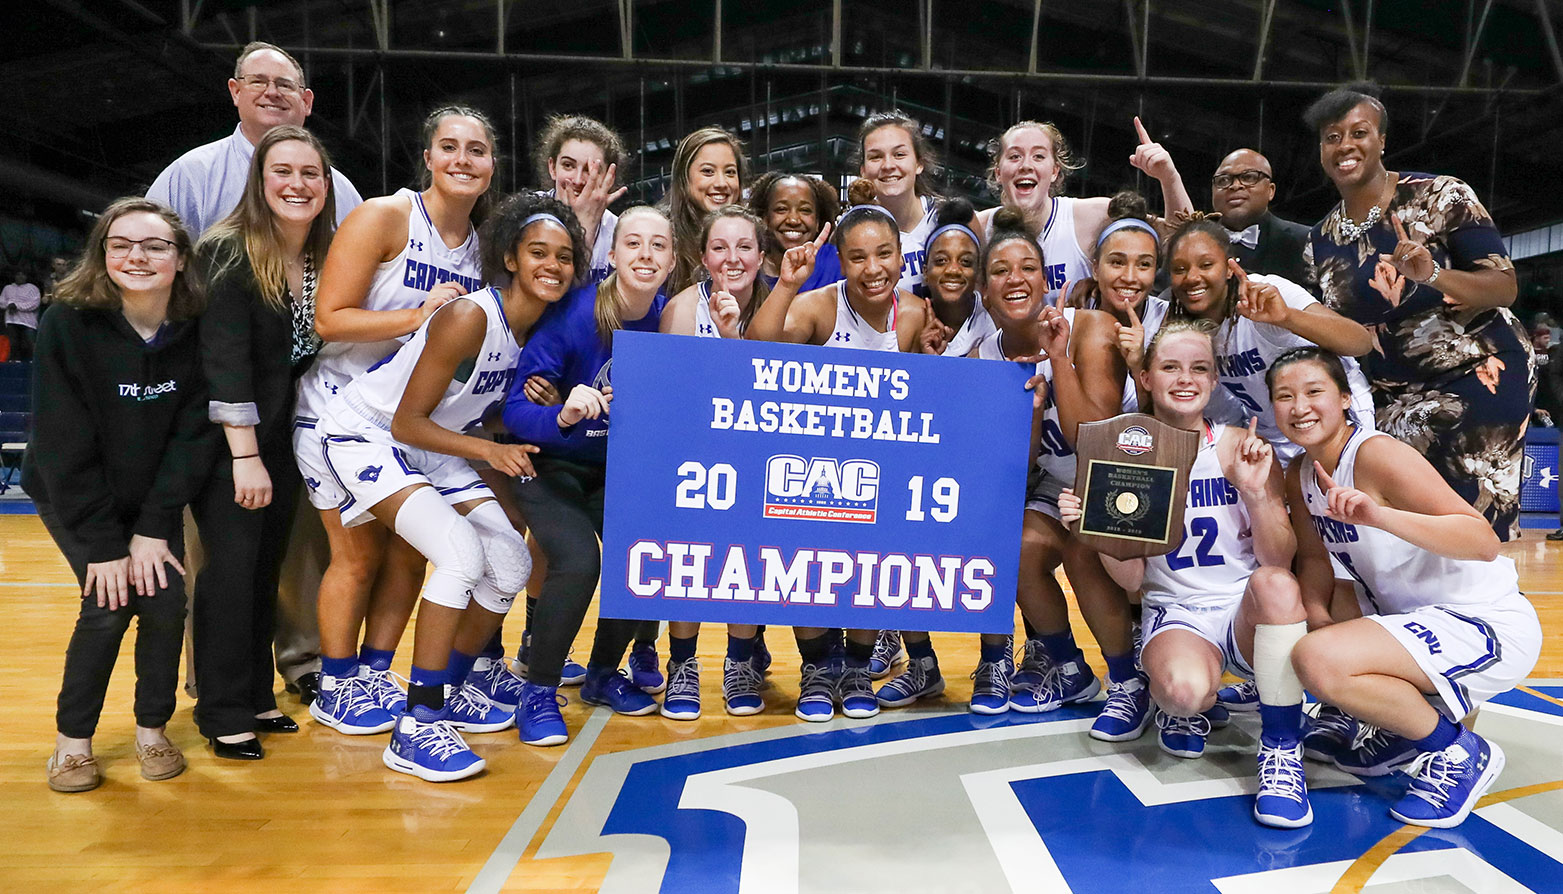 Christopher Newport Crowned 2019 CAC Women's Basketball Champions